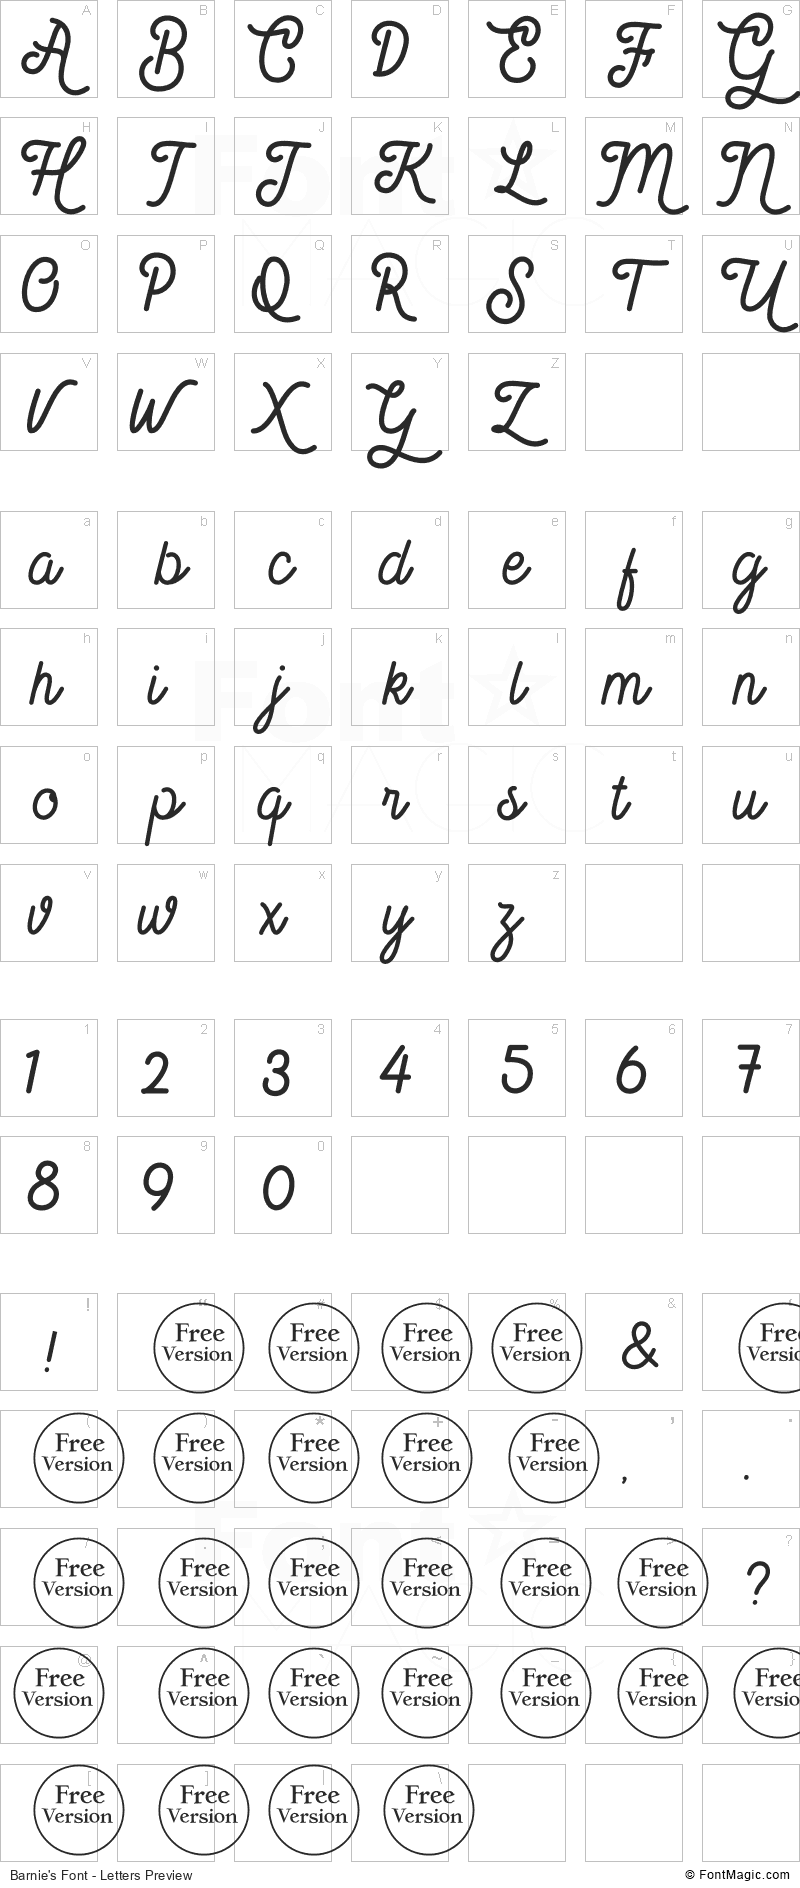 Barnie’s Font - All Latters Preview Chart